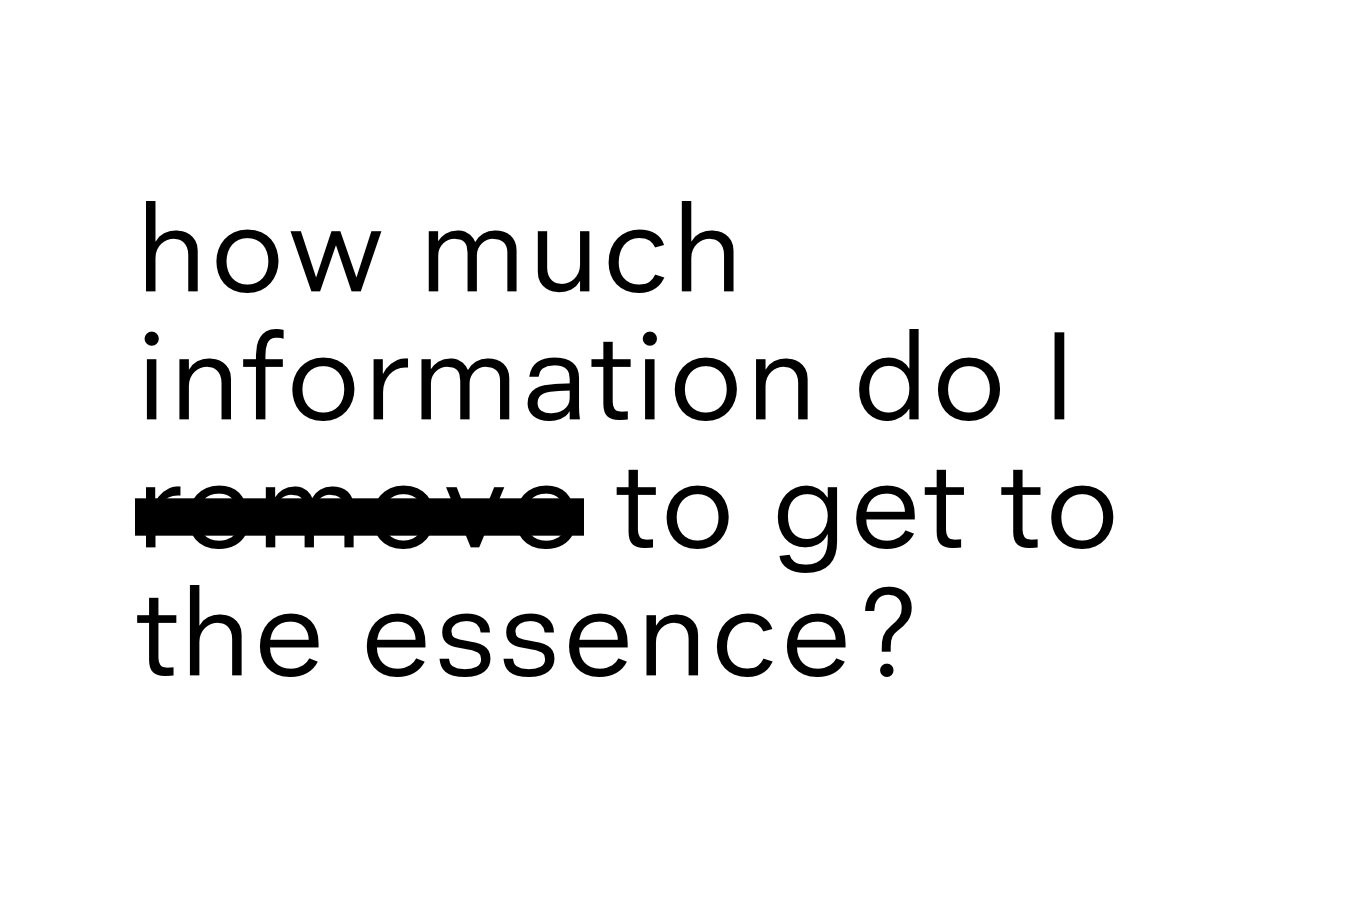 how much information do i remove to get to the essence?